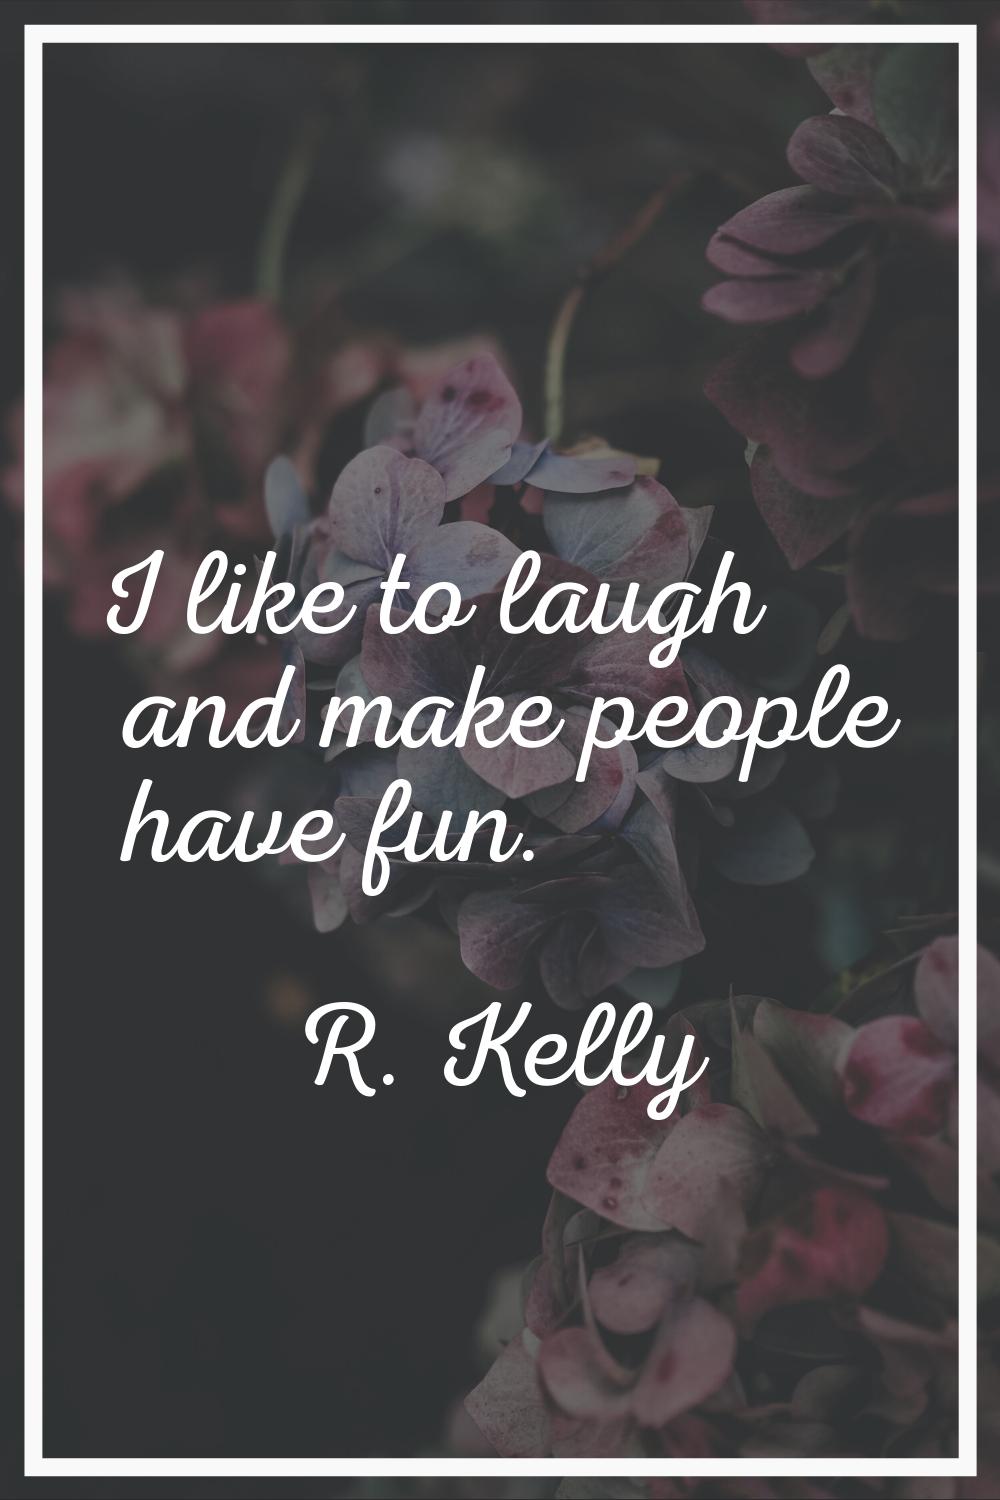 I like to laugh and make people have fun.